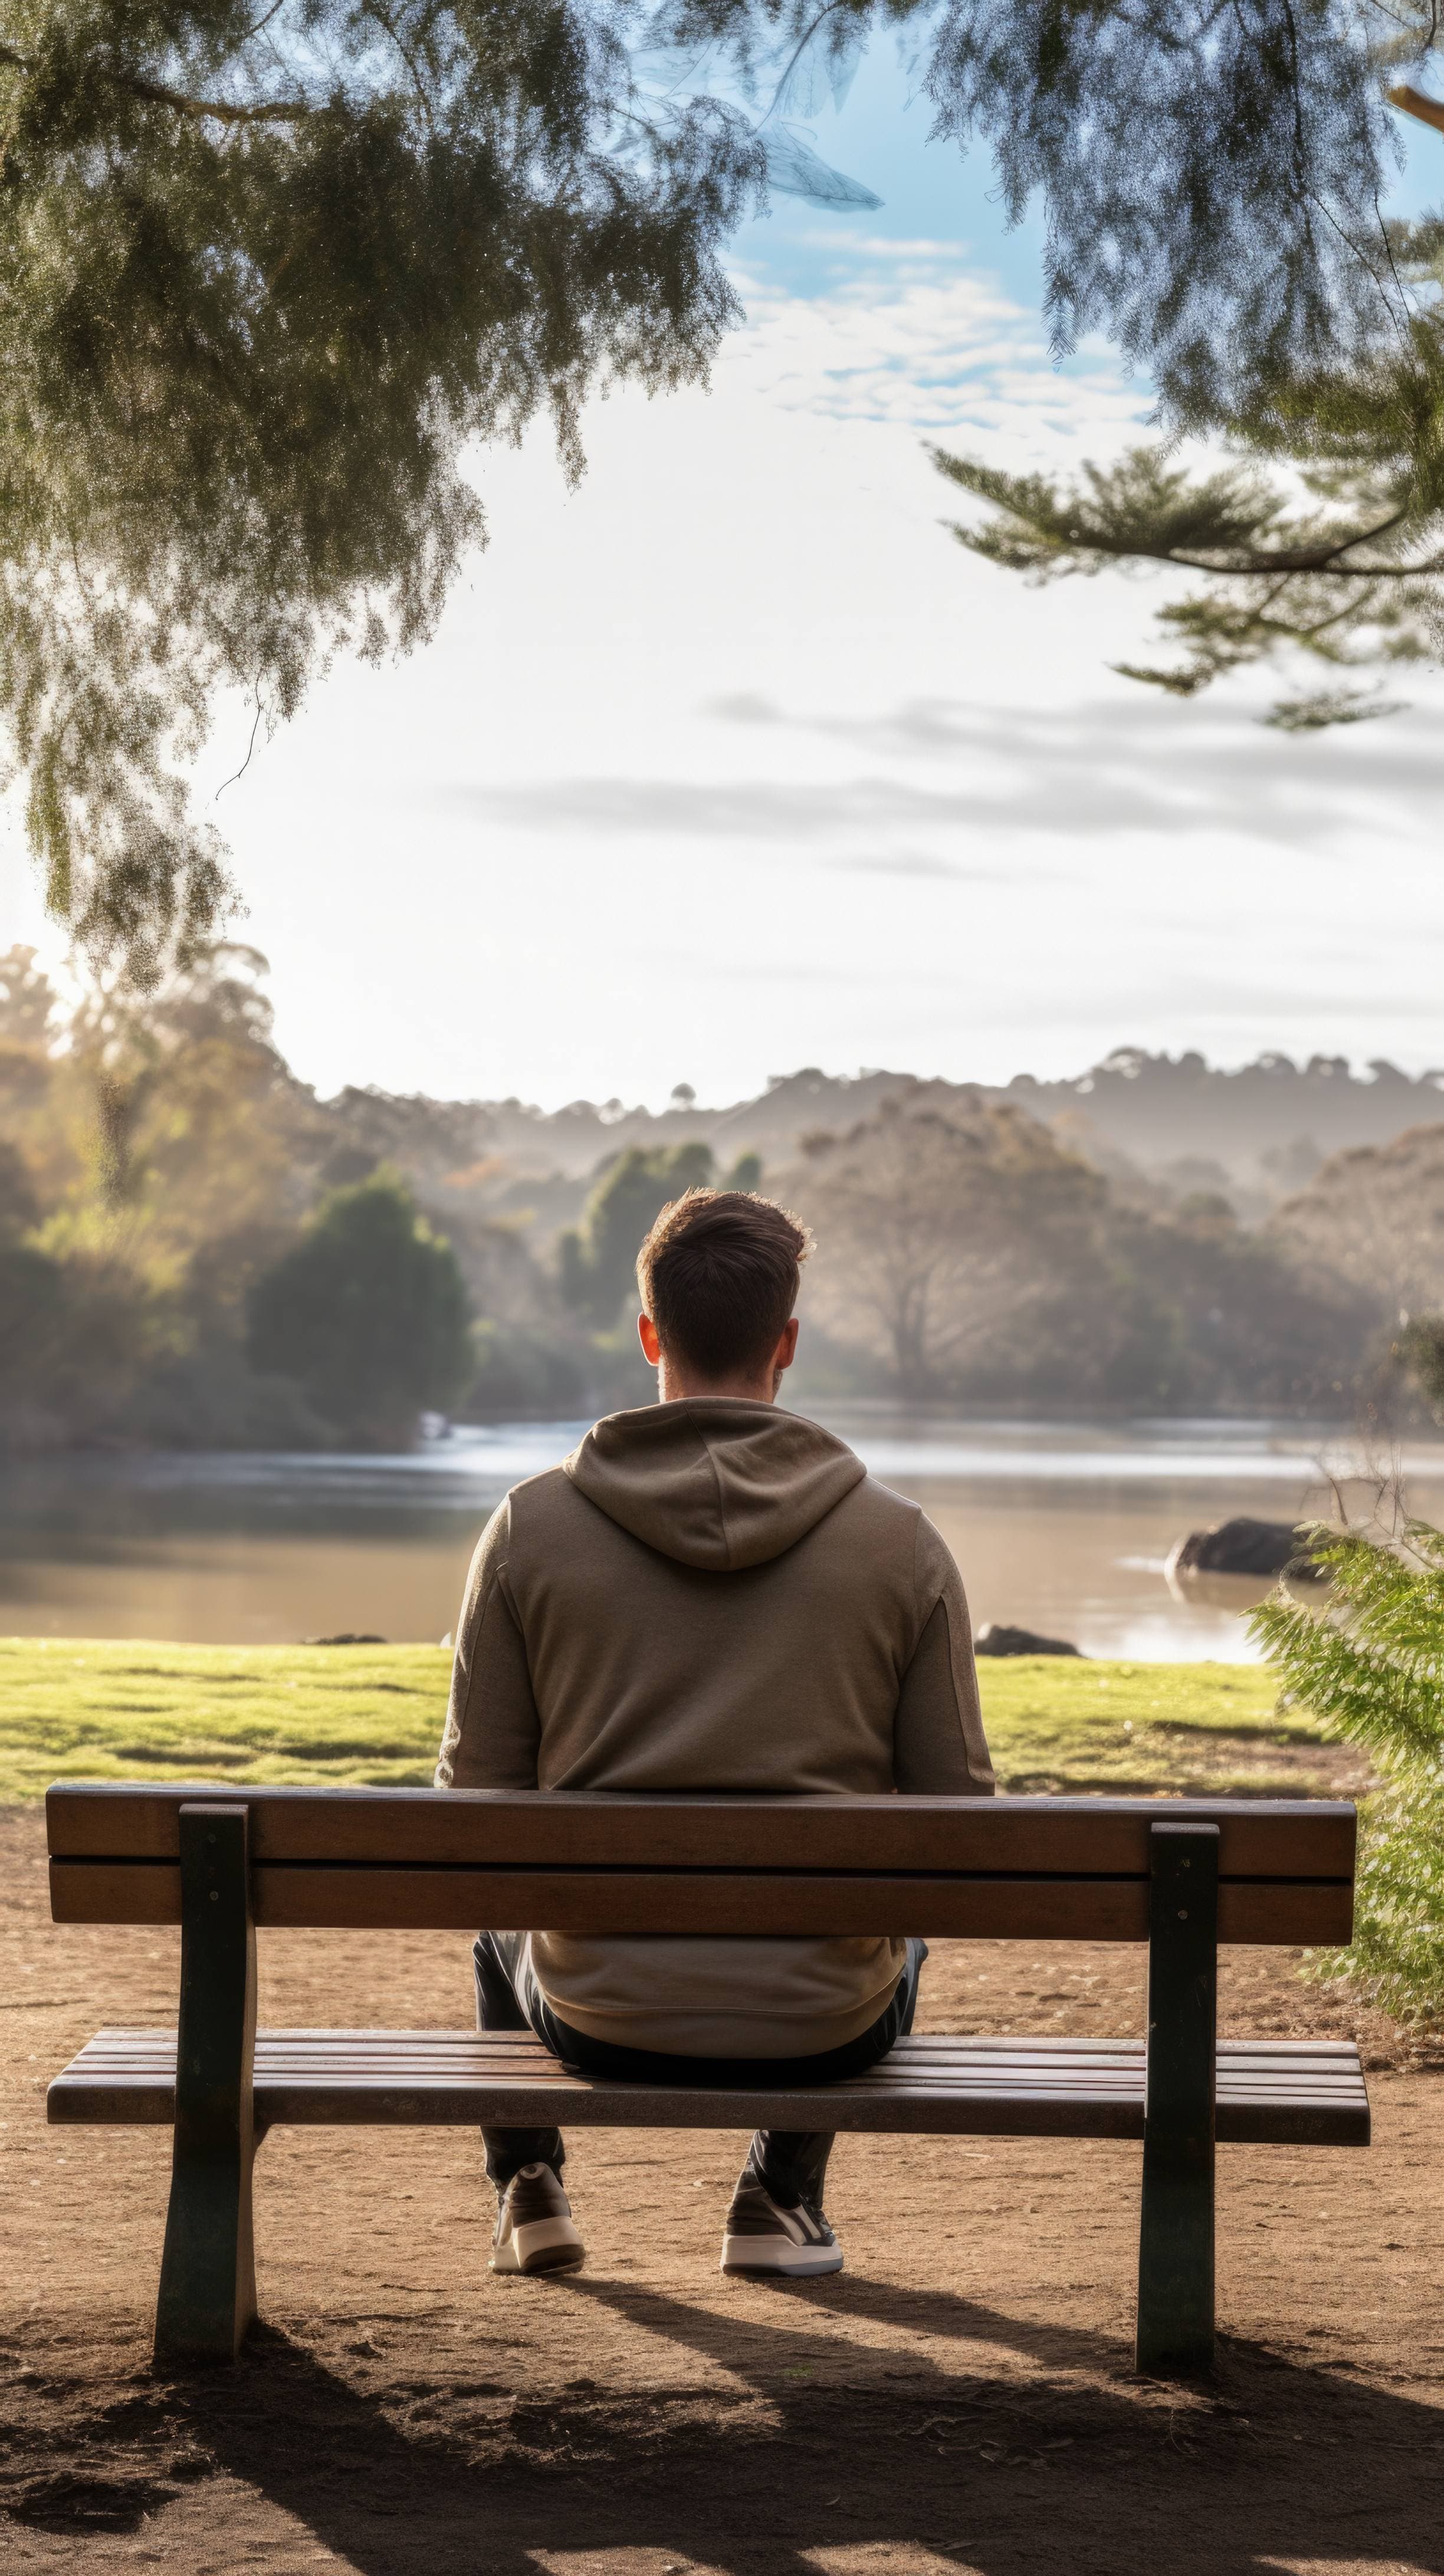 A person sitting alone in a peaceful outdoor setting.